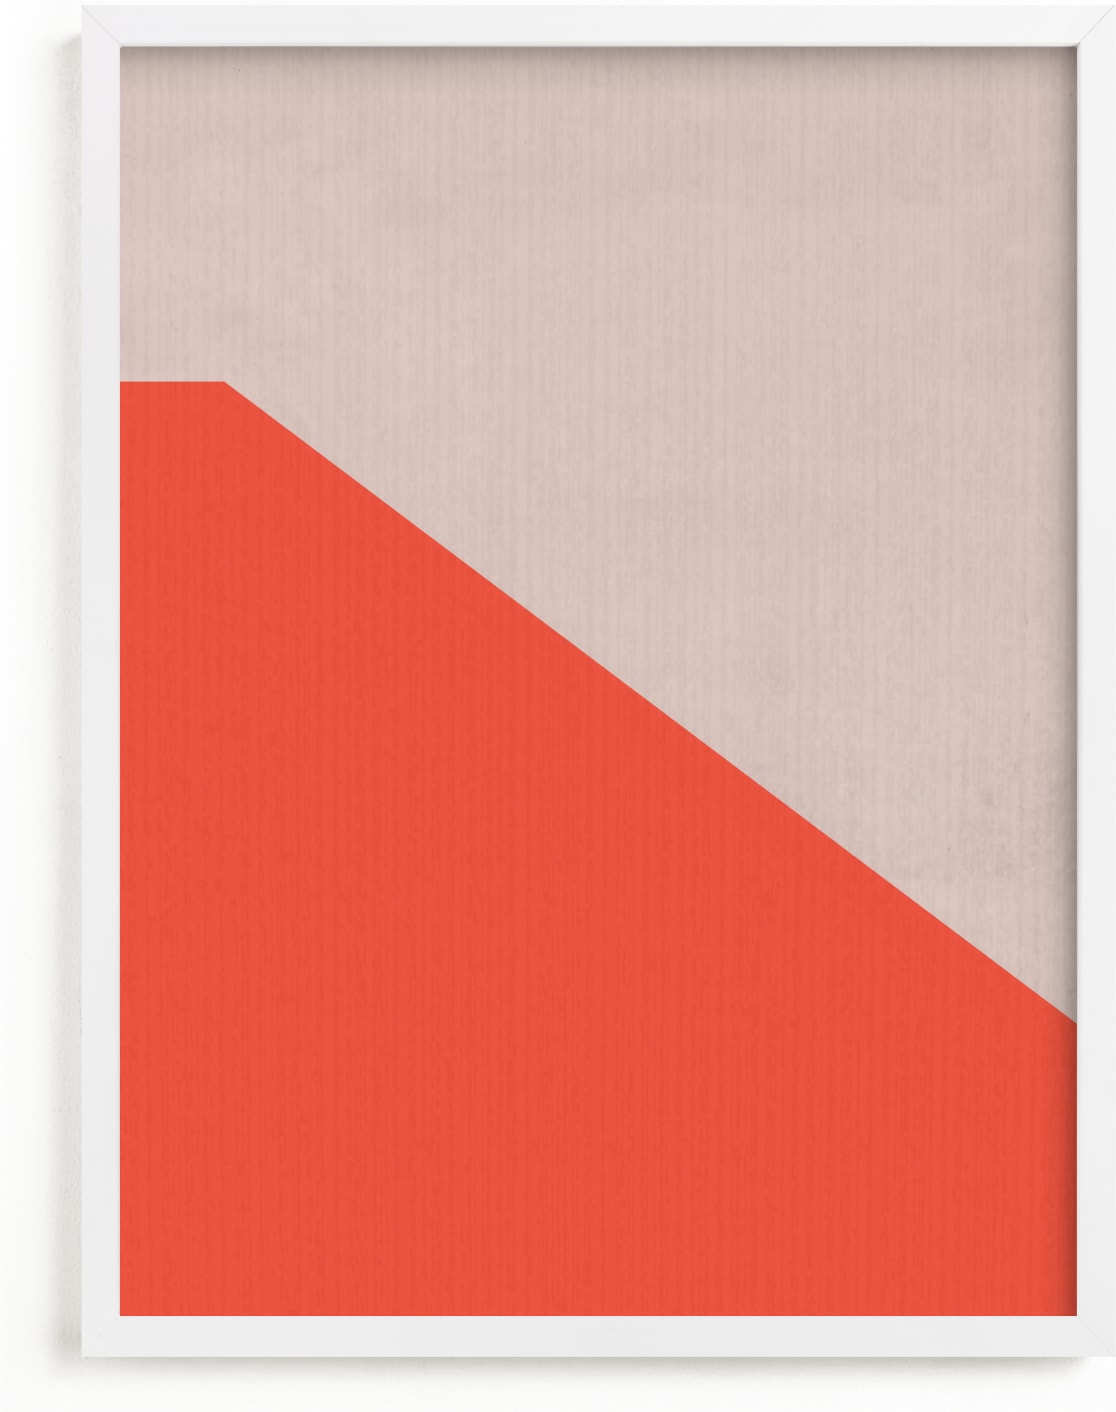 This is a beige art by MinimalType called Sunset Wall.